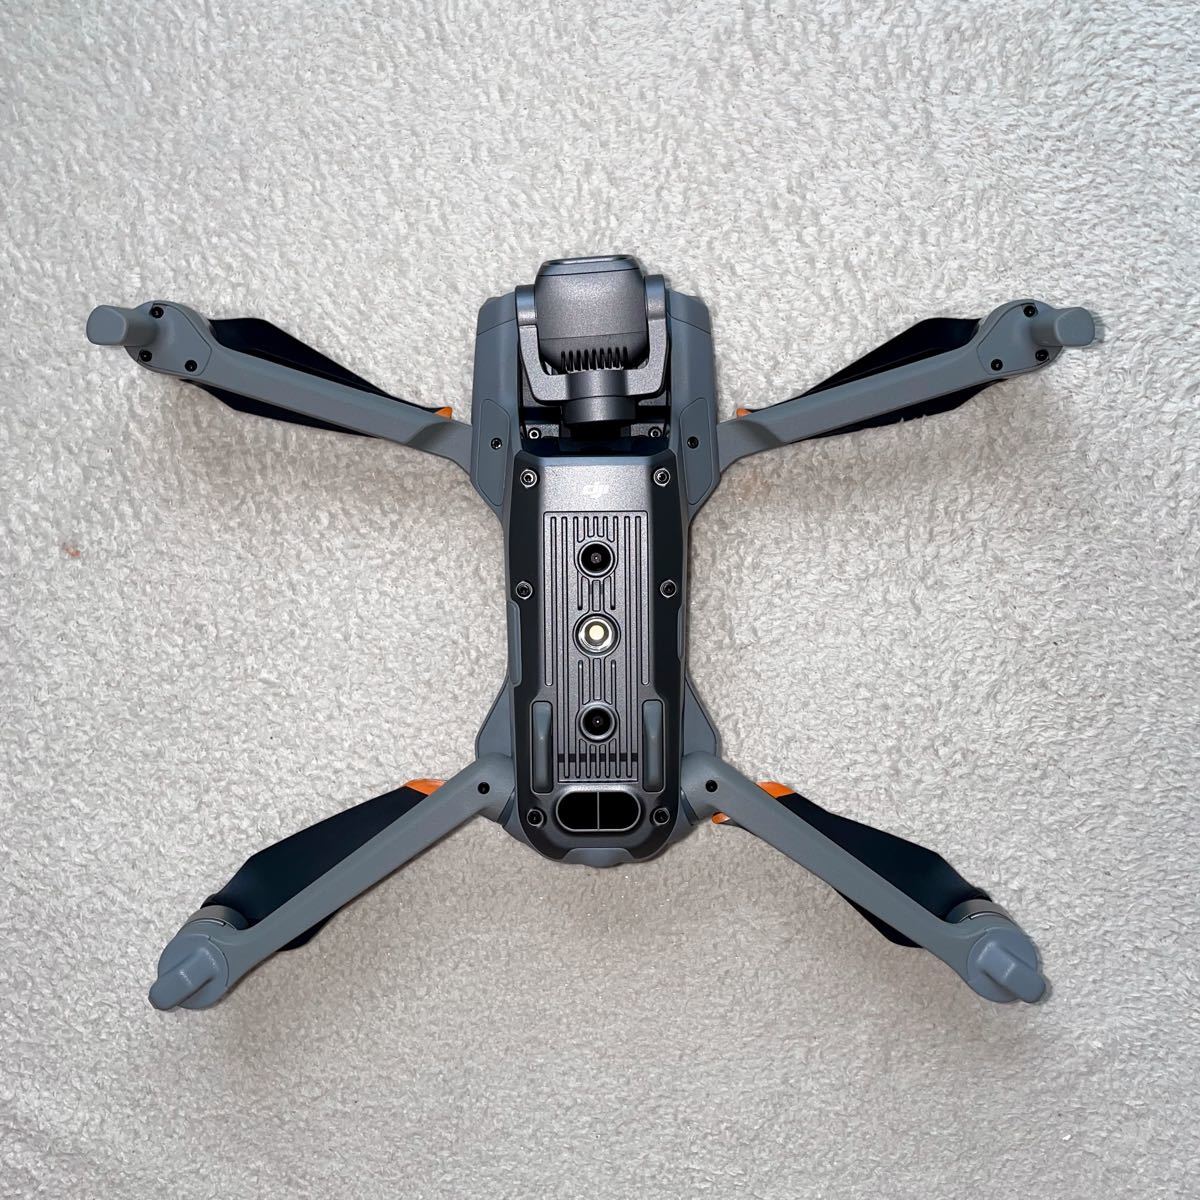 PayPayフリマ｜DJI Air 2S Fly More コンボ 付属品多数 バッテリー 4個 1年保険付き